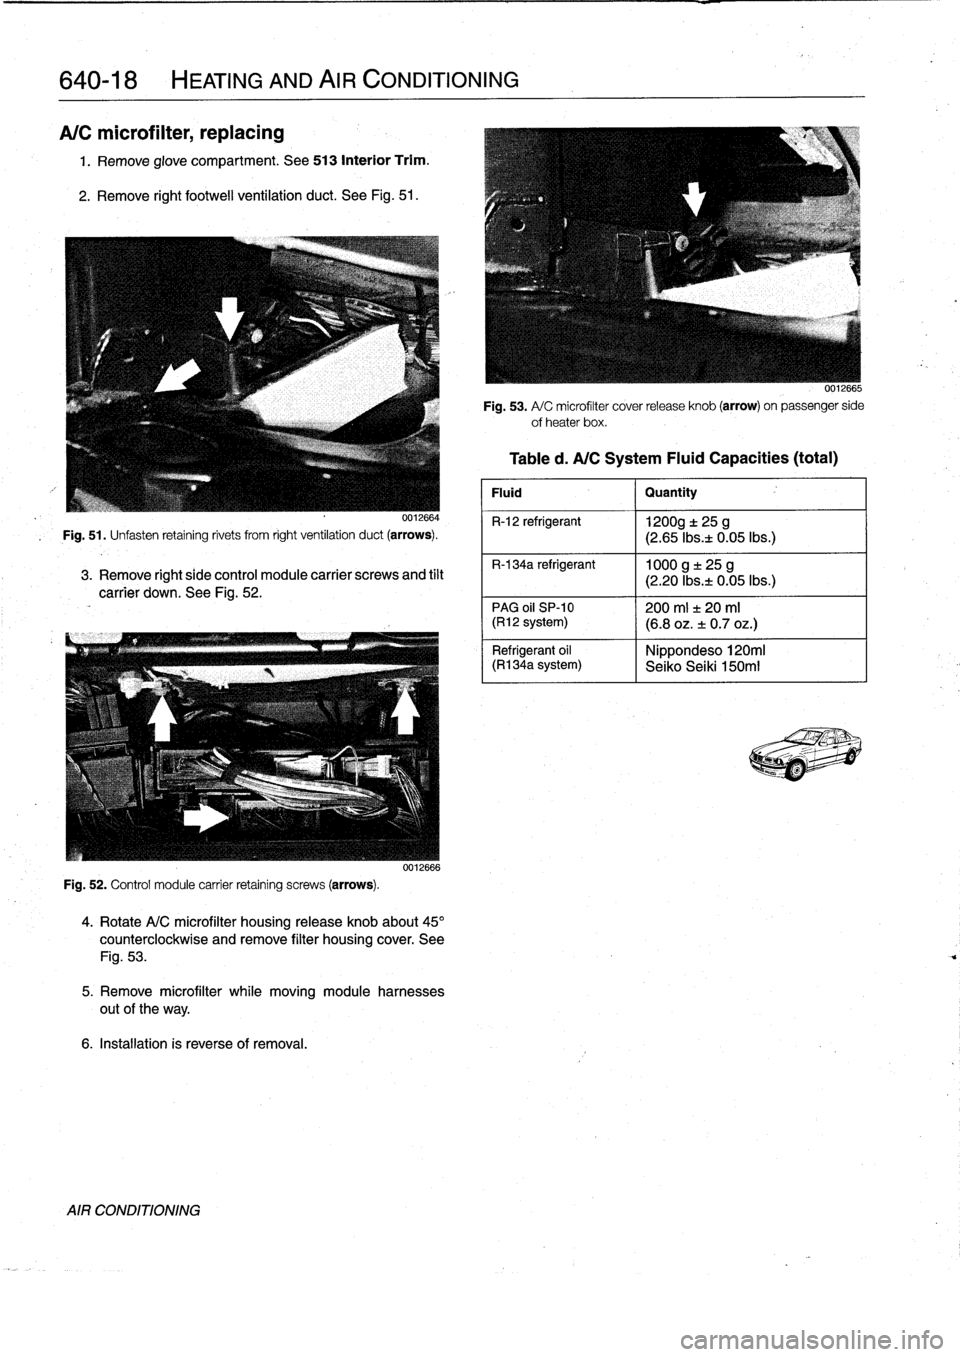 BMW 328i 1994 E36 Workshop Manual 
640-18

	

HEATING
AND
AIR
CONDITIONING

A/C
microfilter,
replacing

1
.
Remove
glove
compartment
.
See
513
Interior
Trim
.

2
.
Remove
right
footwell
ventilation
duct
.
See
Fig
.
51
.

0012664

Fig
